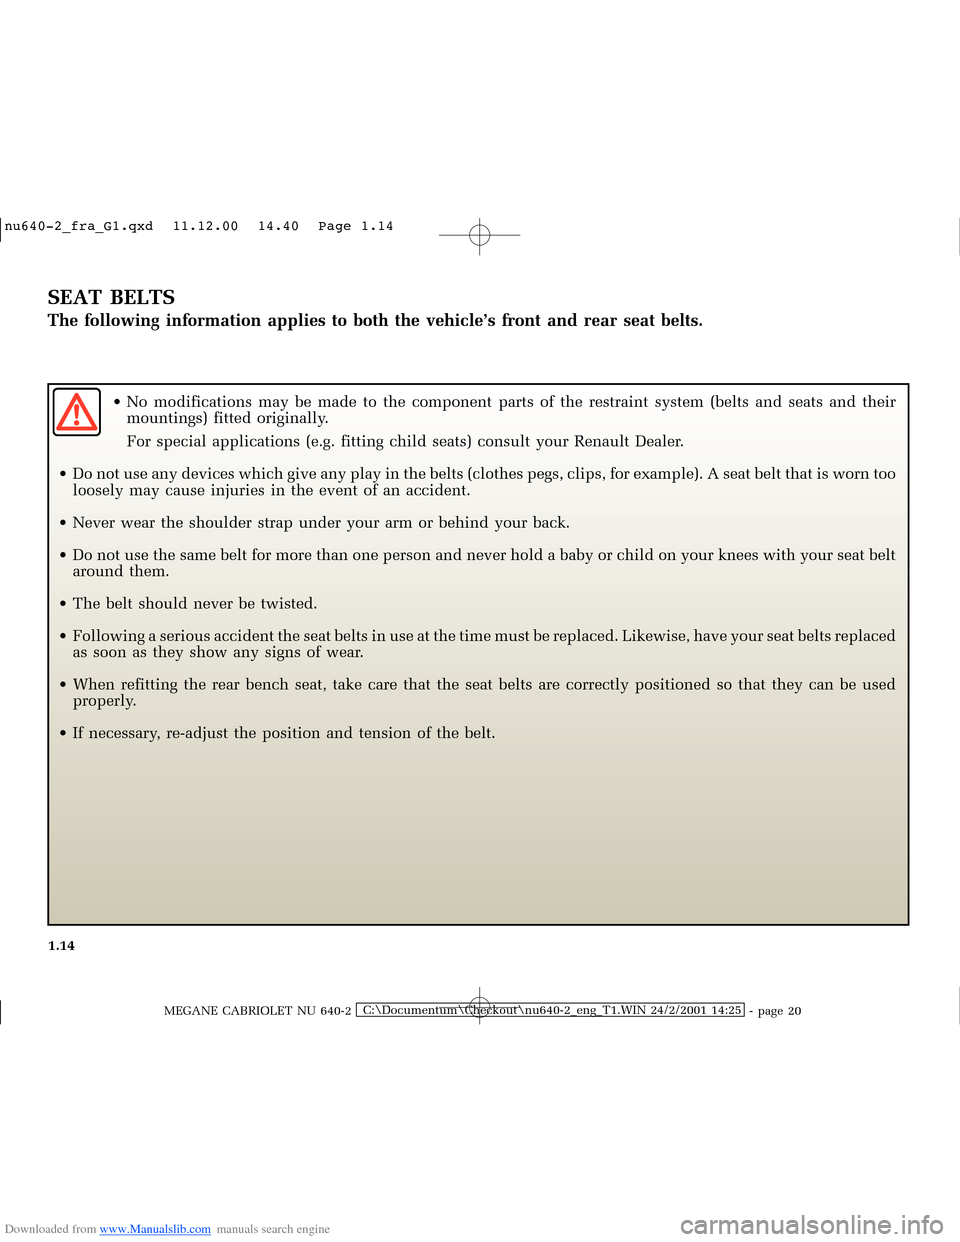 RENAULT MEGANE 2000 X64 / 1.G Owners Manual Downloaded from www.Manualslib.com manuals search engine �Q�X������B�I�U�D�B�*���T�[�G� � ��������� � ������ � �3�D�J�H� ����
MEGANE CABRIOLET NU 640-2C:\Documentum\Chec